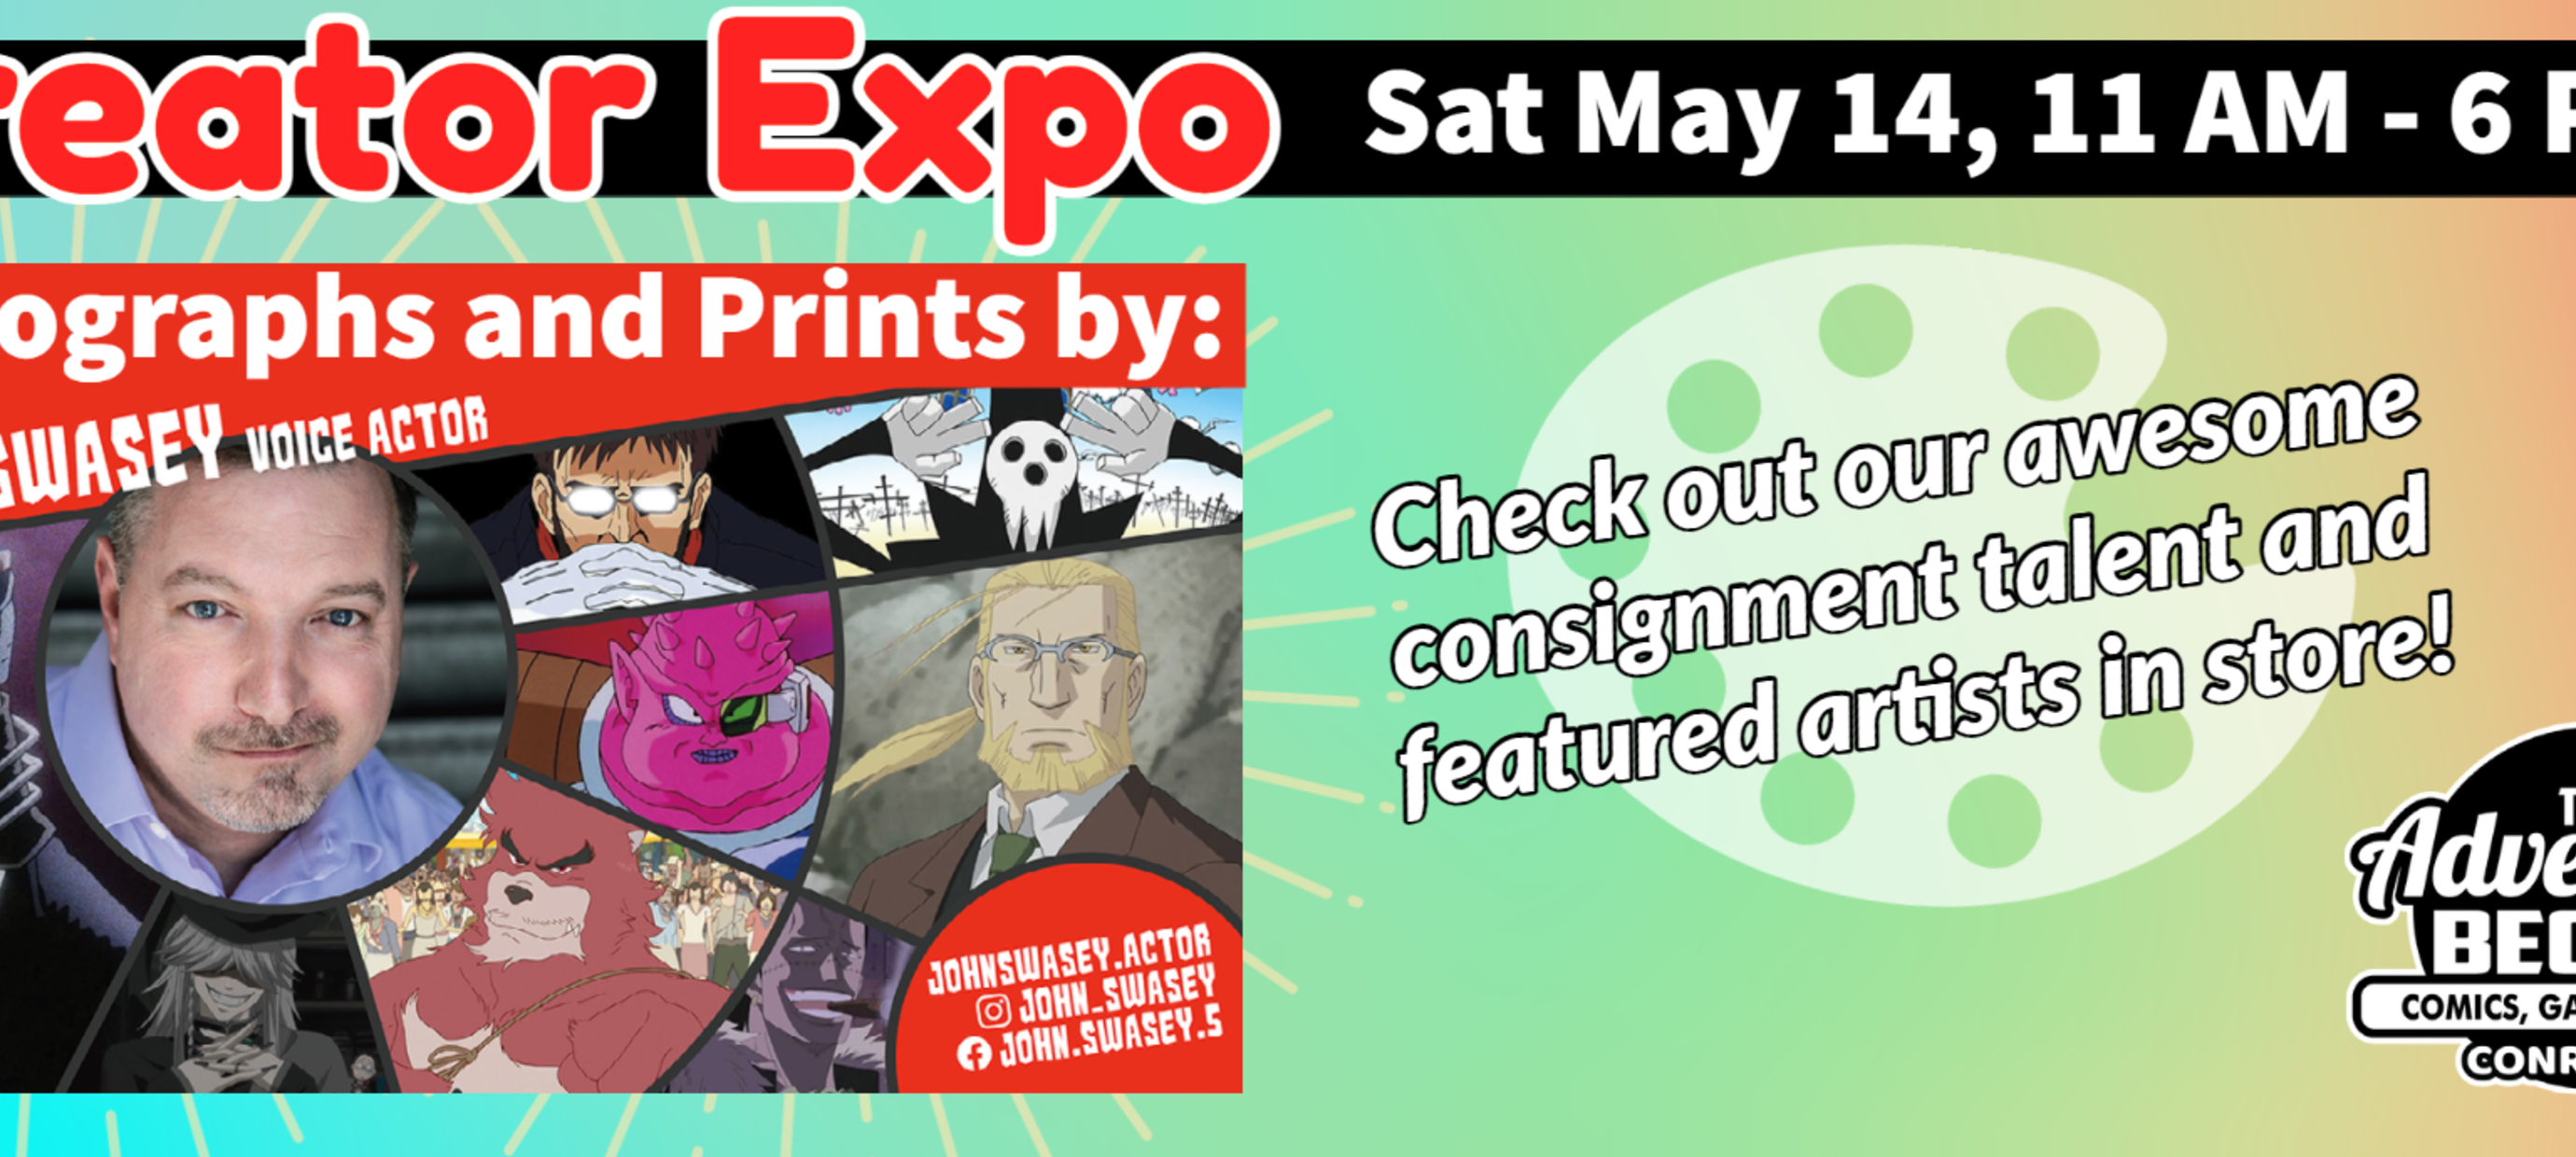 Community | Events This Week: Creator Expo & More!